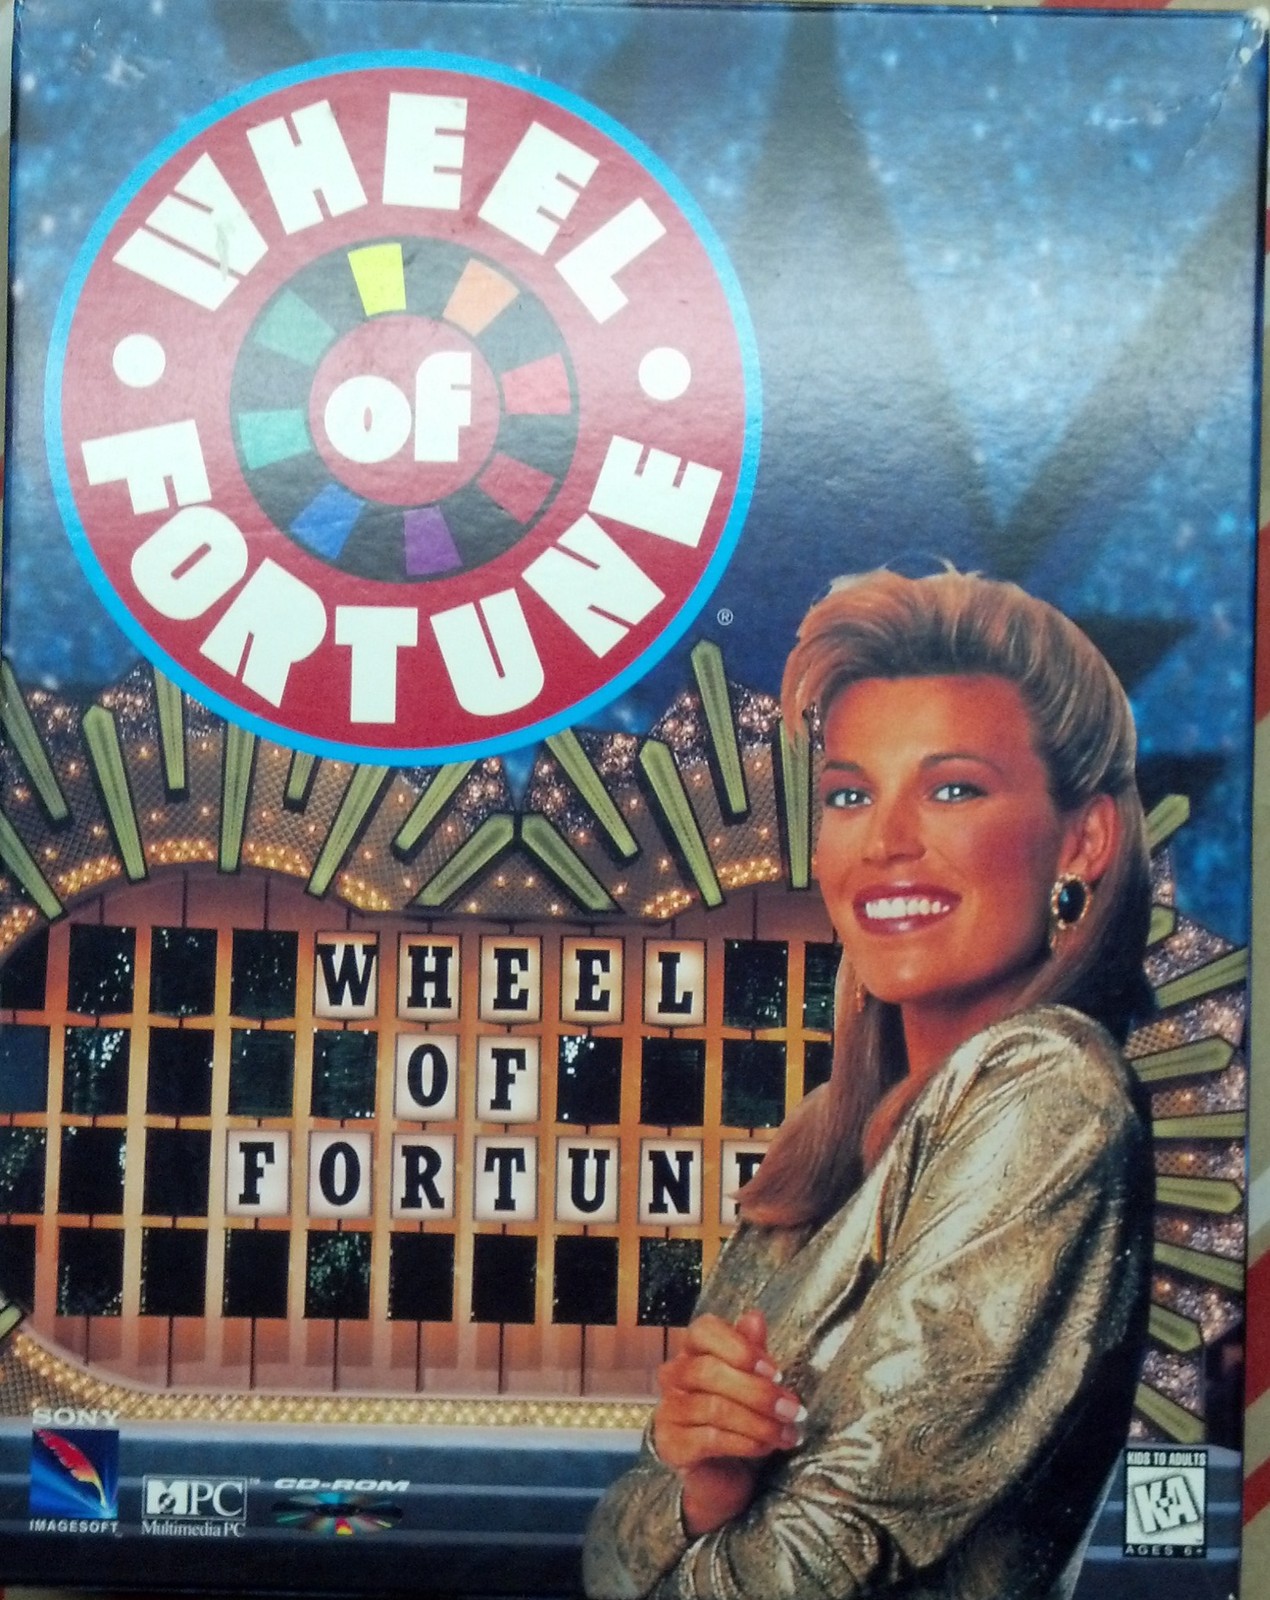 Primary image for Wheel of Fortune - PC Software CD-ROM for Windows 3.1 or Higher.